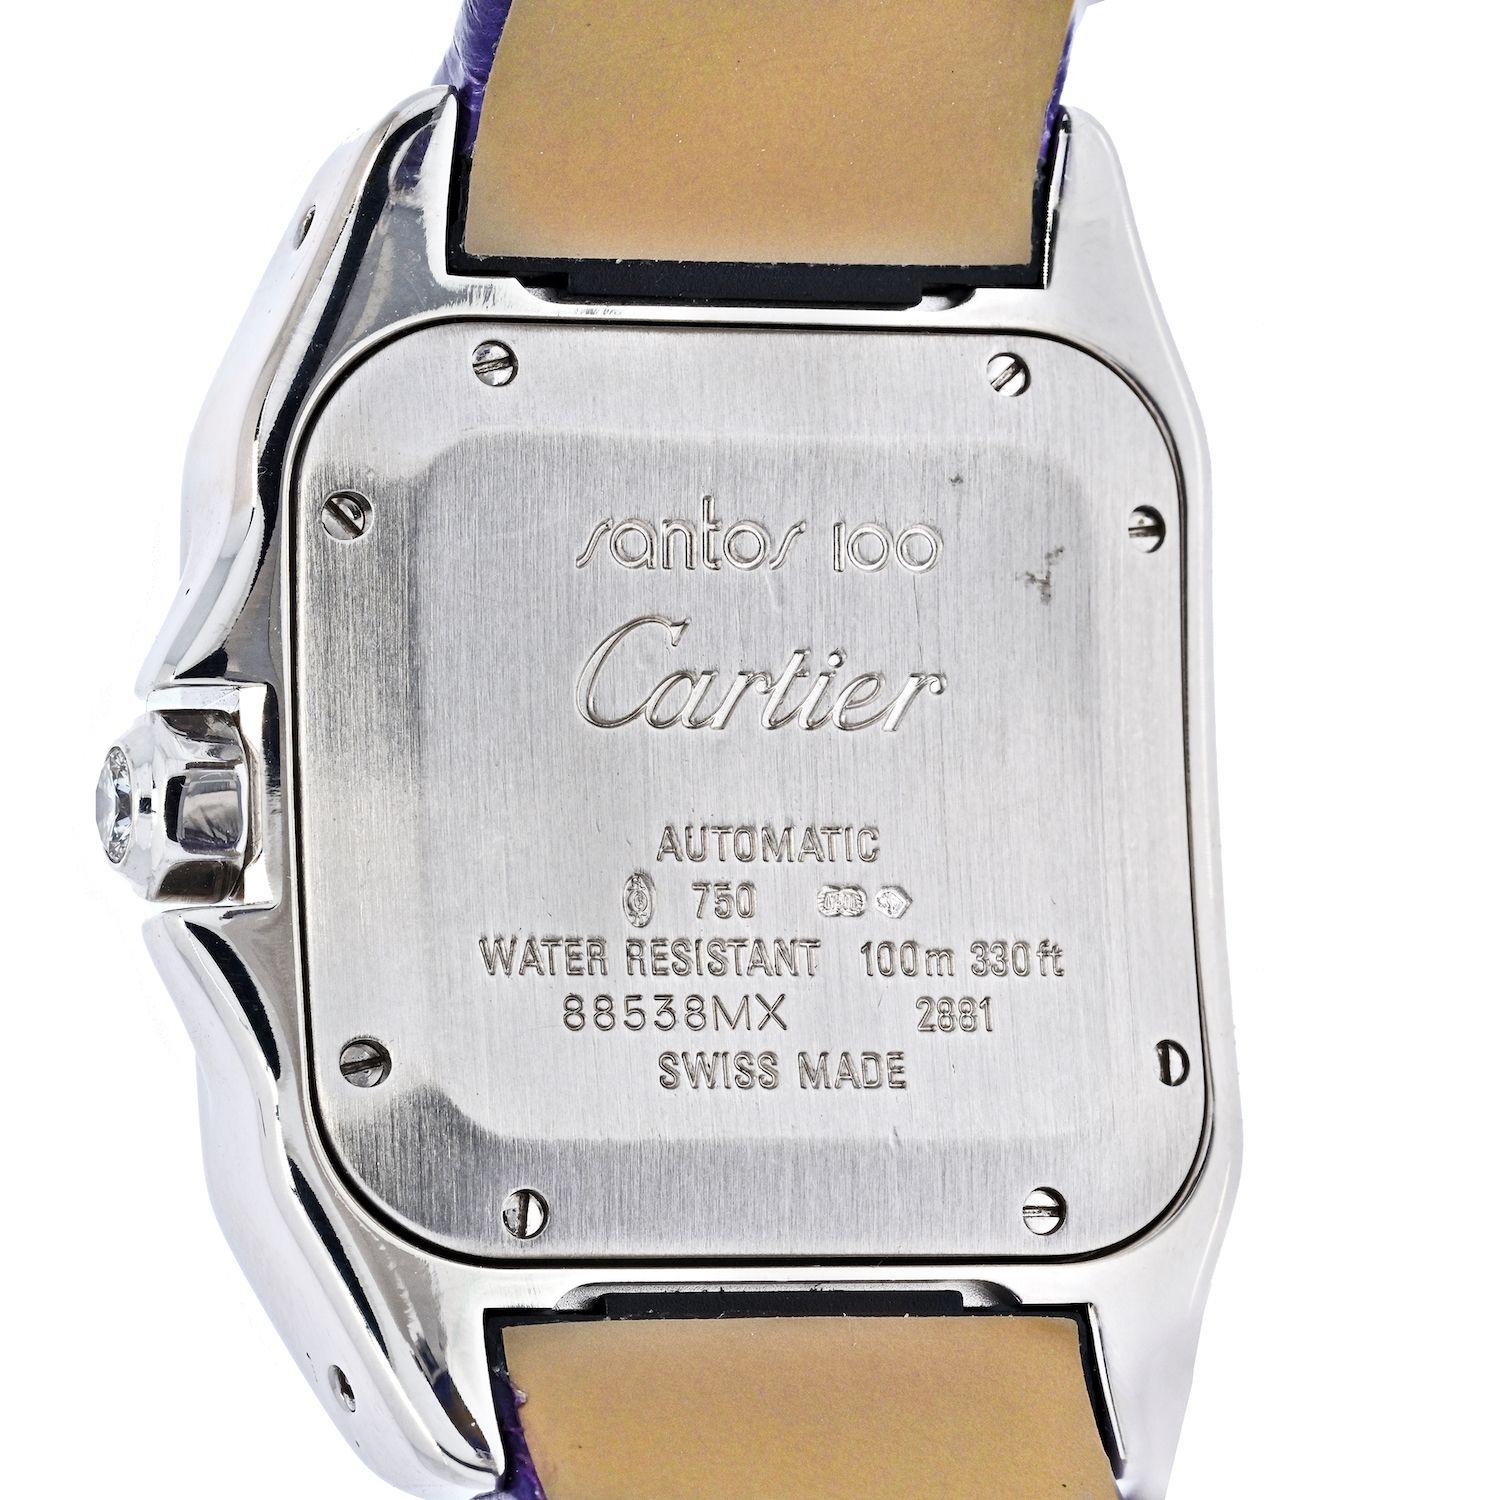 You will fall in love with this beautiful Cartier Santos watch the moment you see it. 
It has everything going for it: diamond bezel, perfect 33mm width of the case, purple leather bracelet, grey and very rare mother of pearl dial. It's a unisex